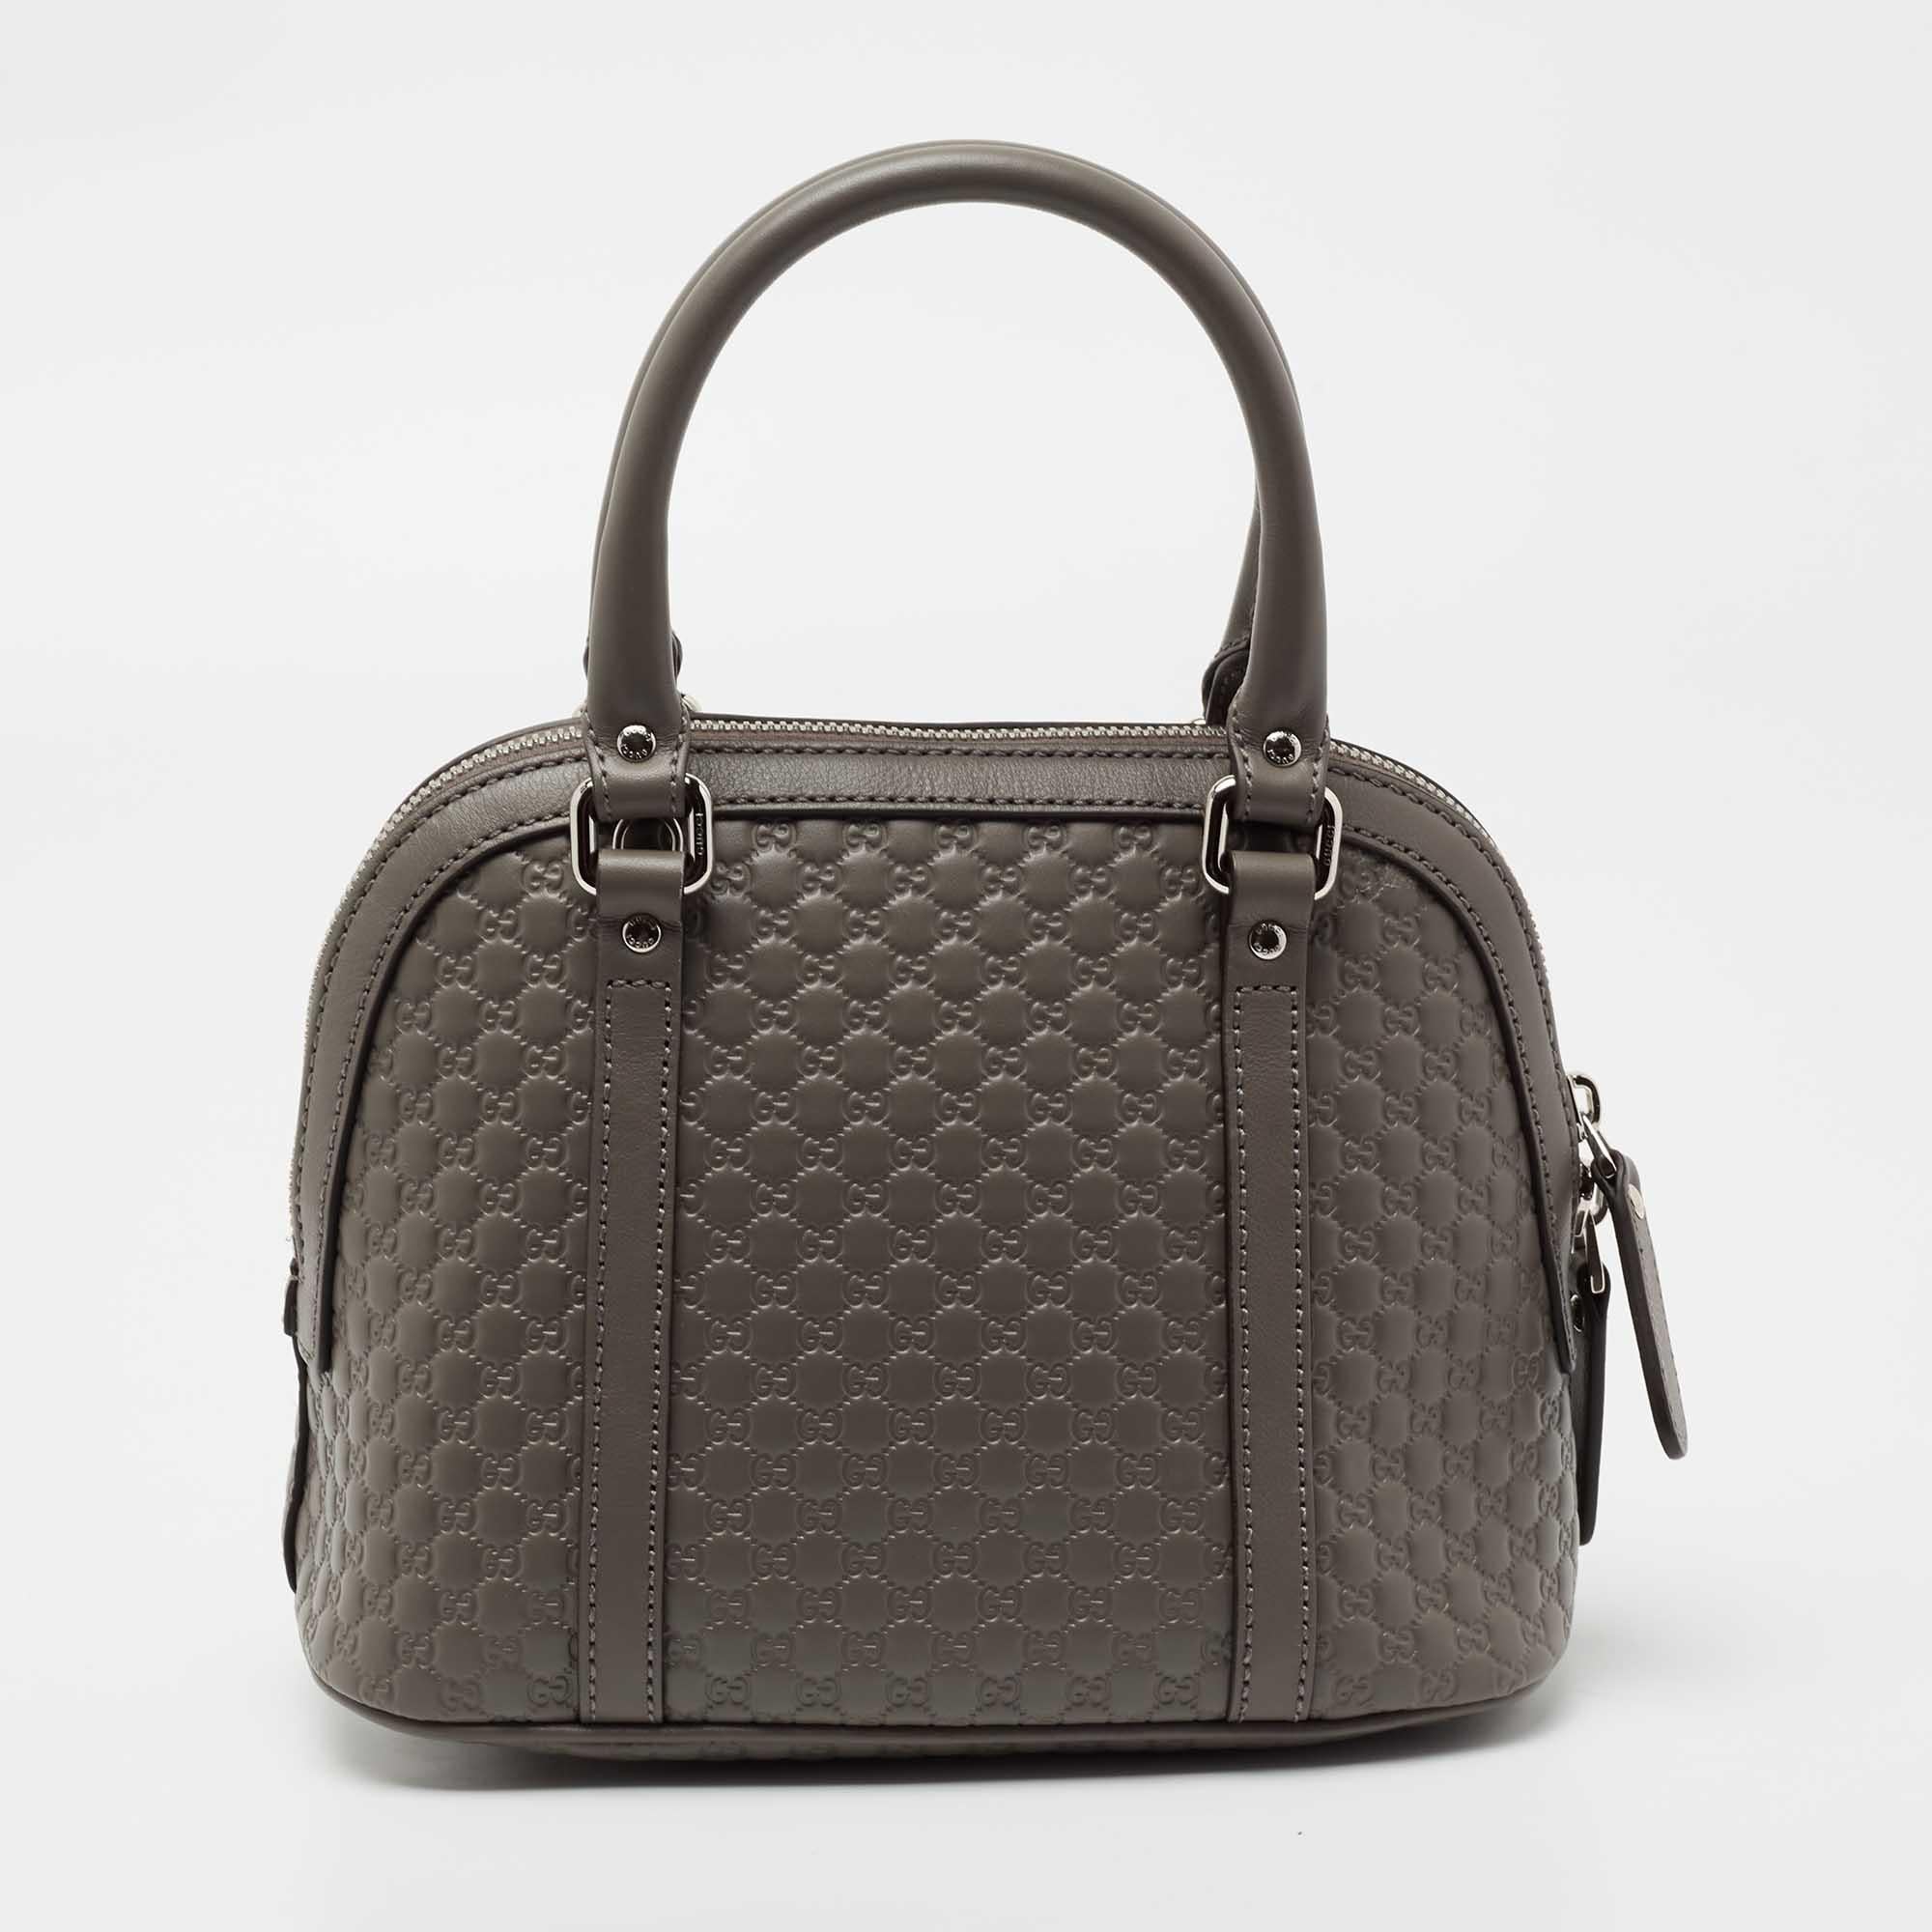 This mini Dome bag from the house of Gucci is an absolutely beautiful creation. Crafted using grey Microguccissima leather, this bag features gold-toned hardware along with top dual handles and a shoulder strap. The zipper leads us to the spacious